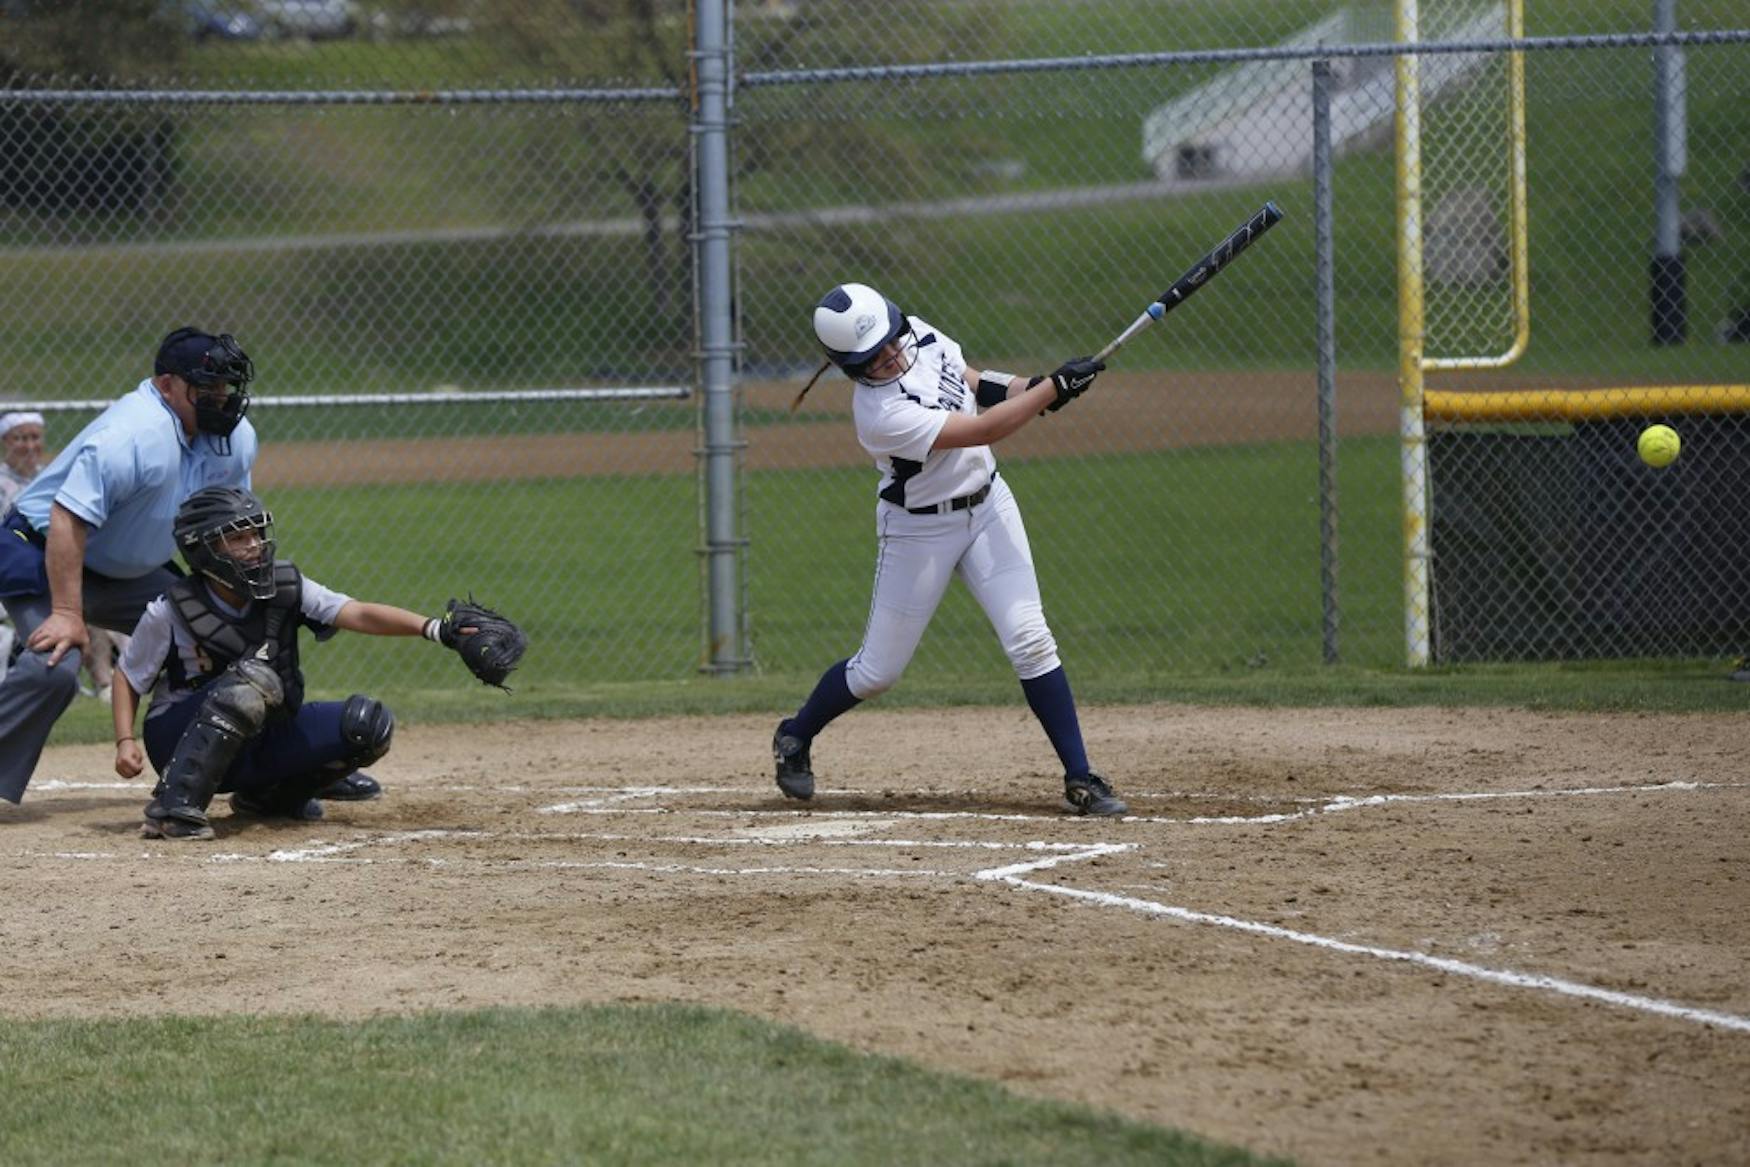 EYES ON THE BALL: Infielder Liana Moss ’17 makes contact in the Judges’ 8-6 victory against Emerson College last May.